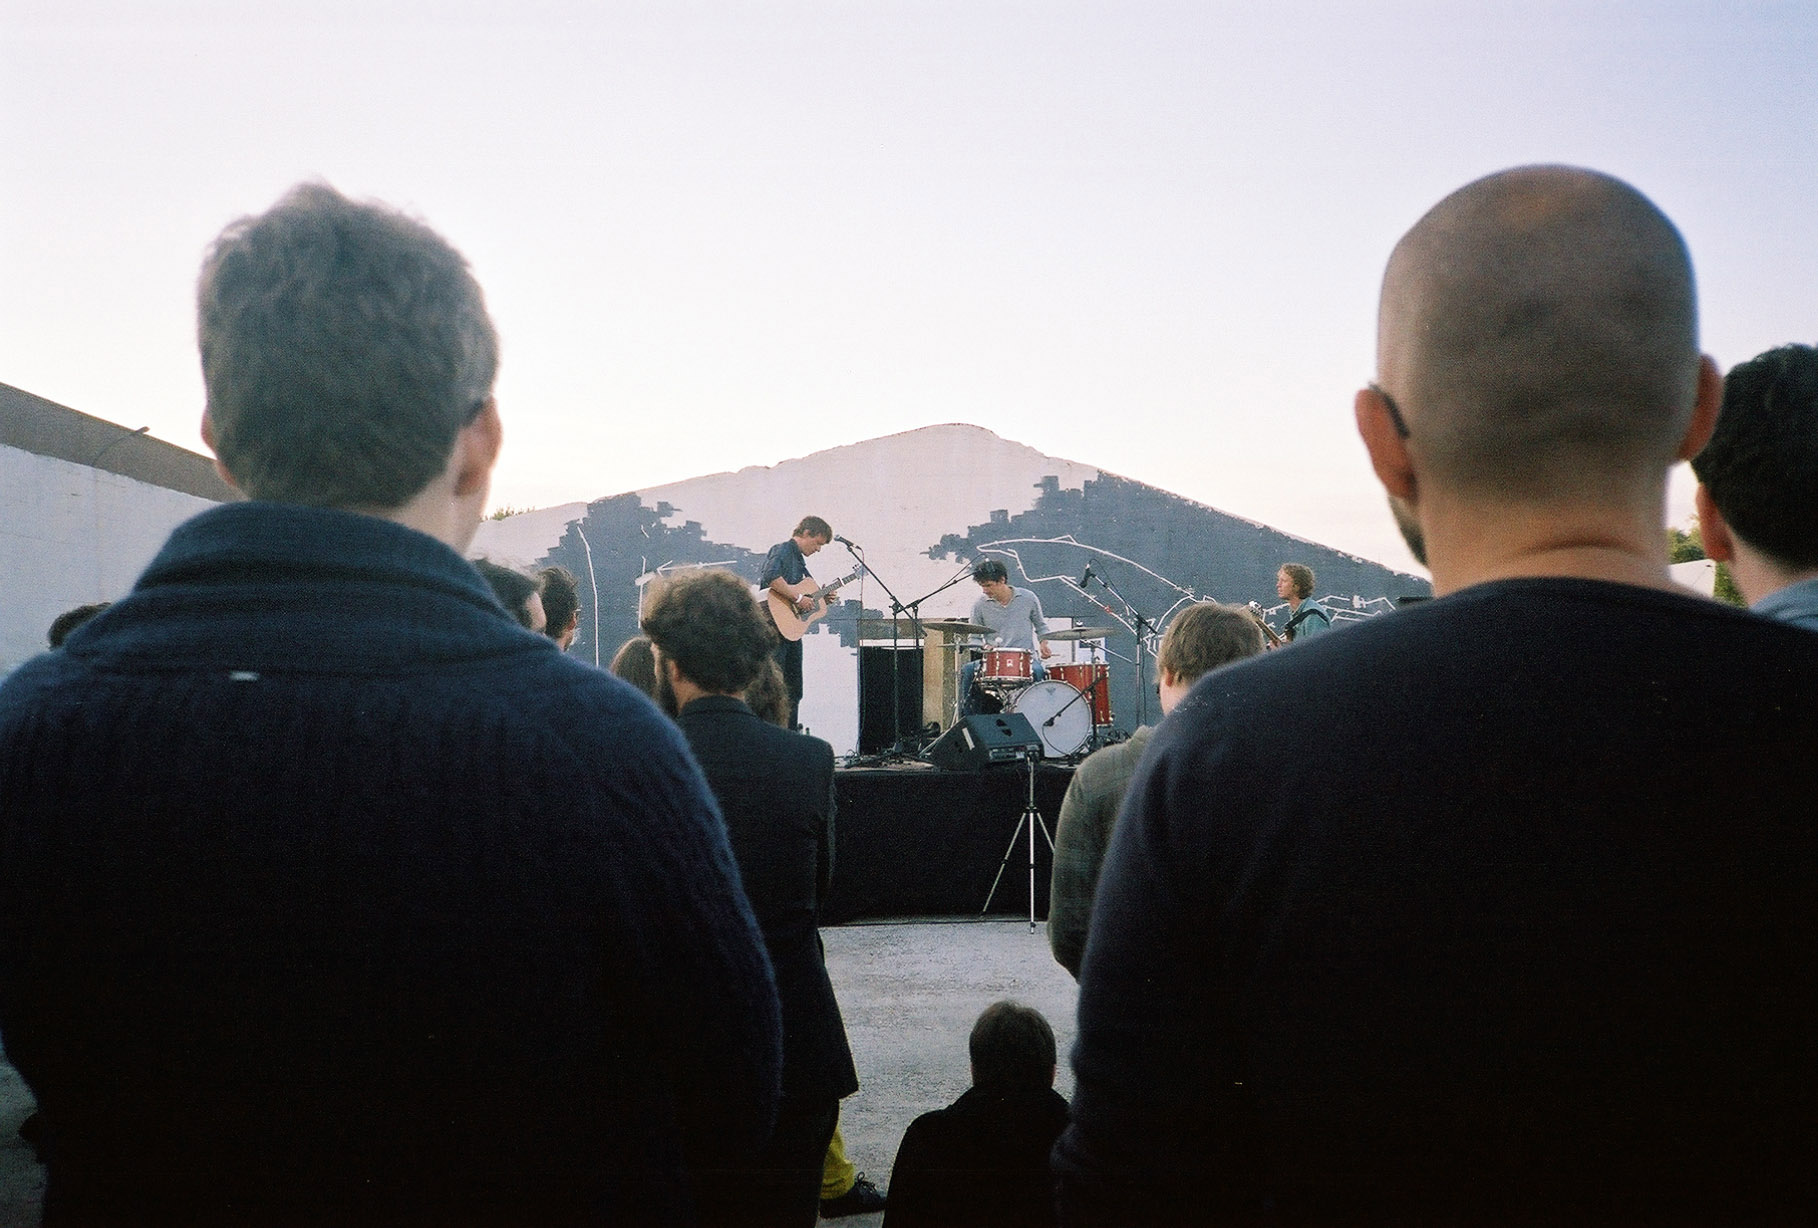 view through the heads of a crowd to a band playing on stage